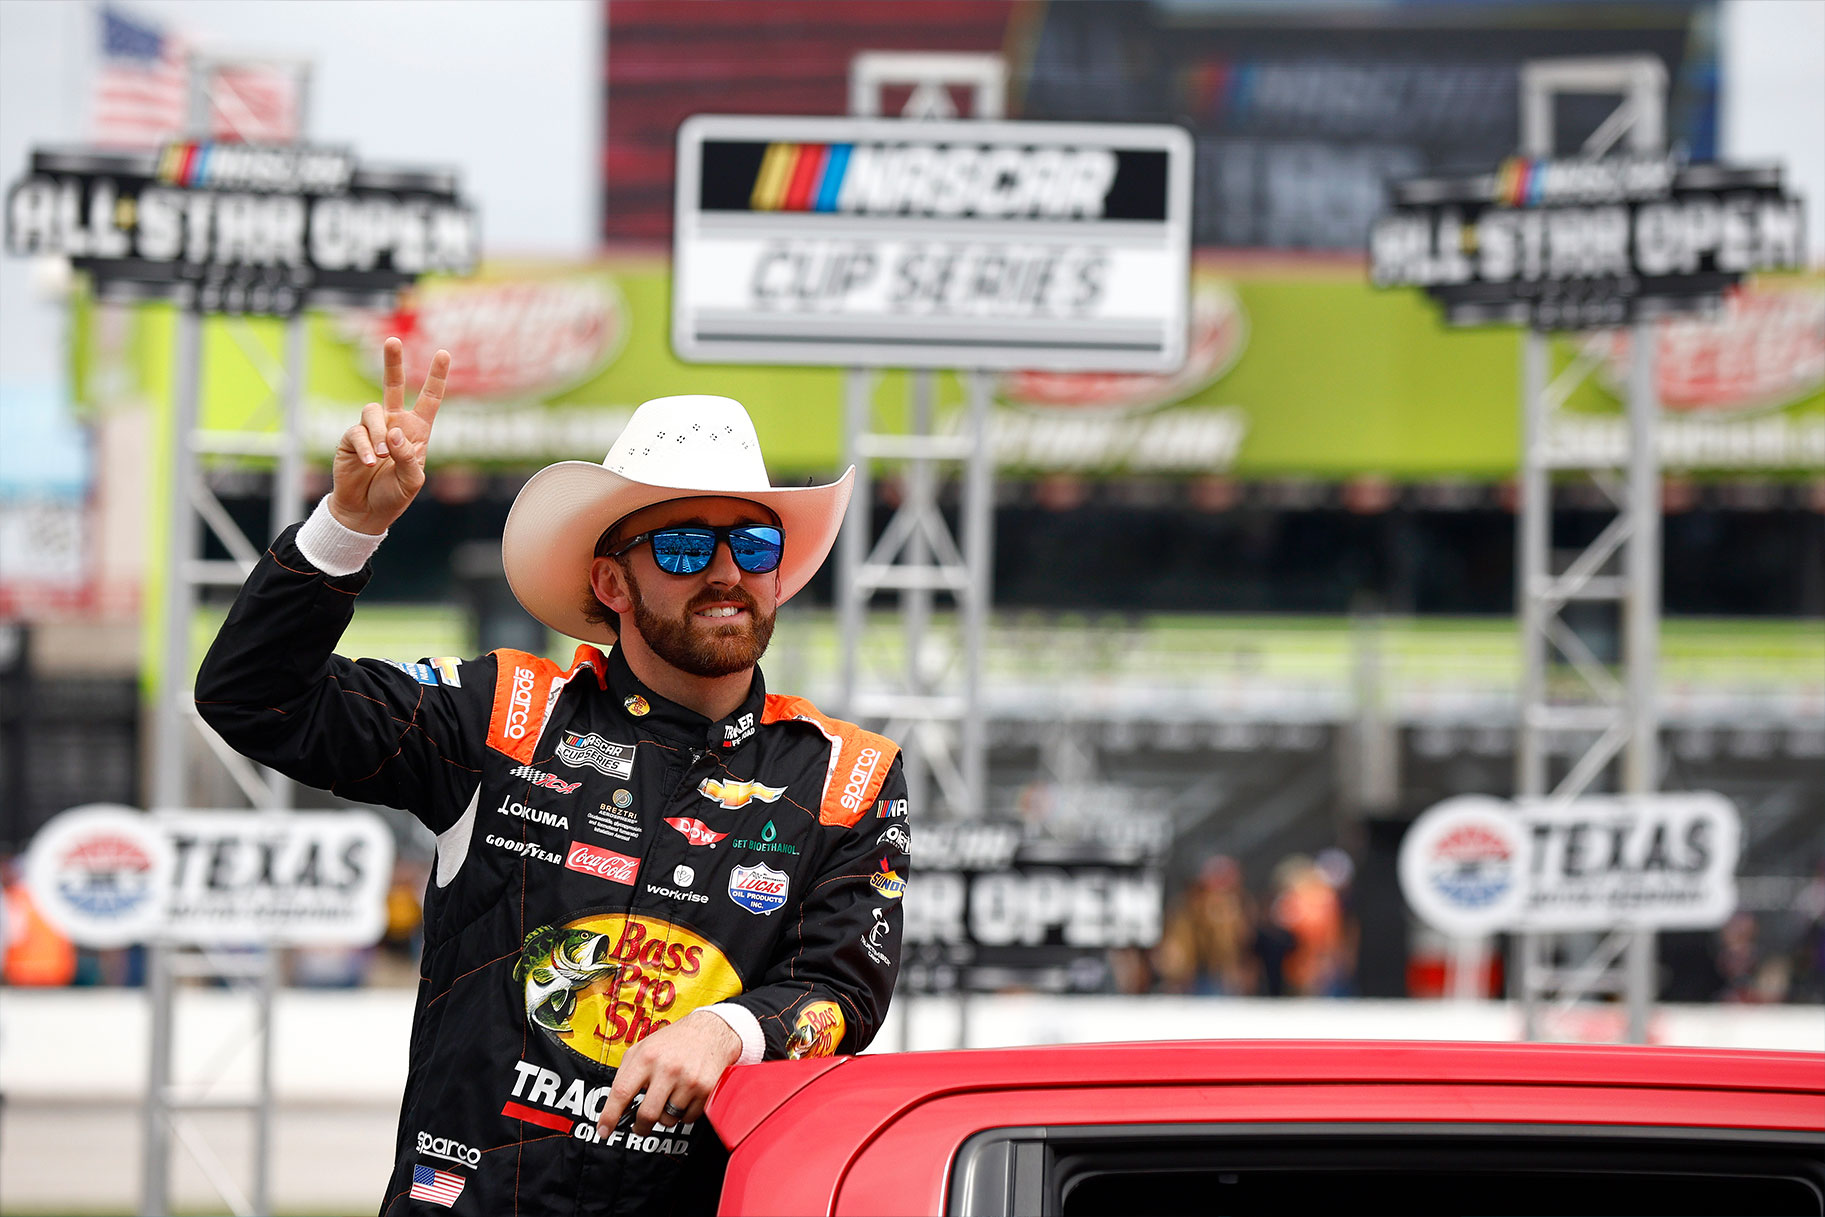 Austin Dillon leaning on his racecar while wearing a cowboy hat and sunglasses